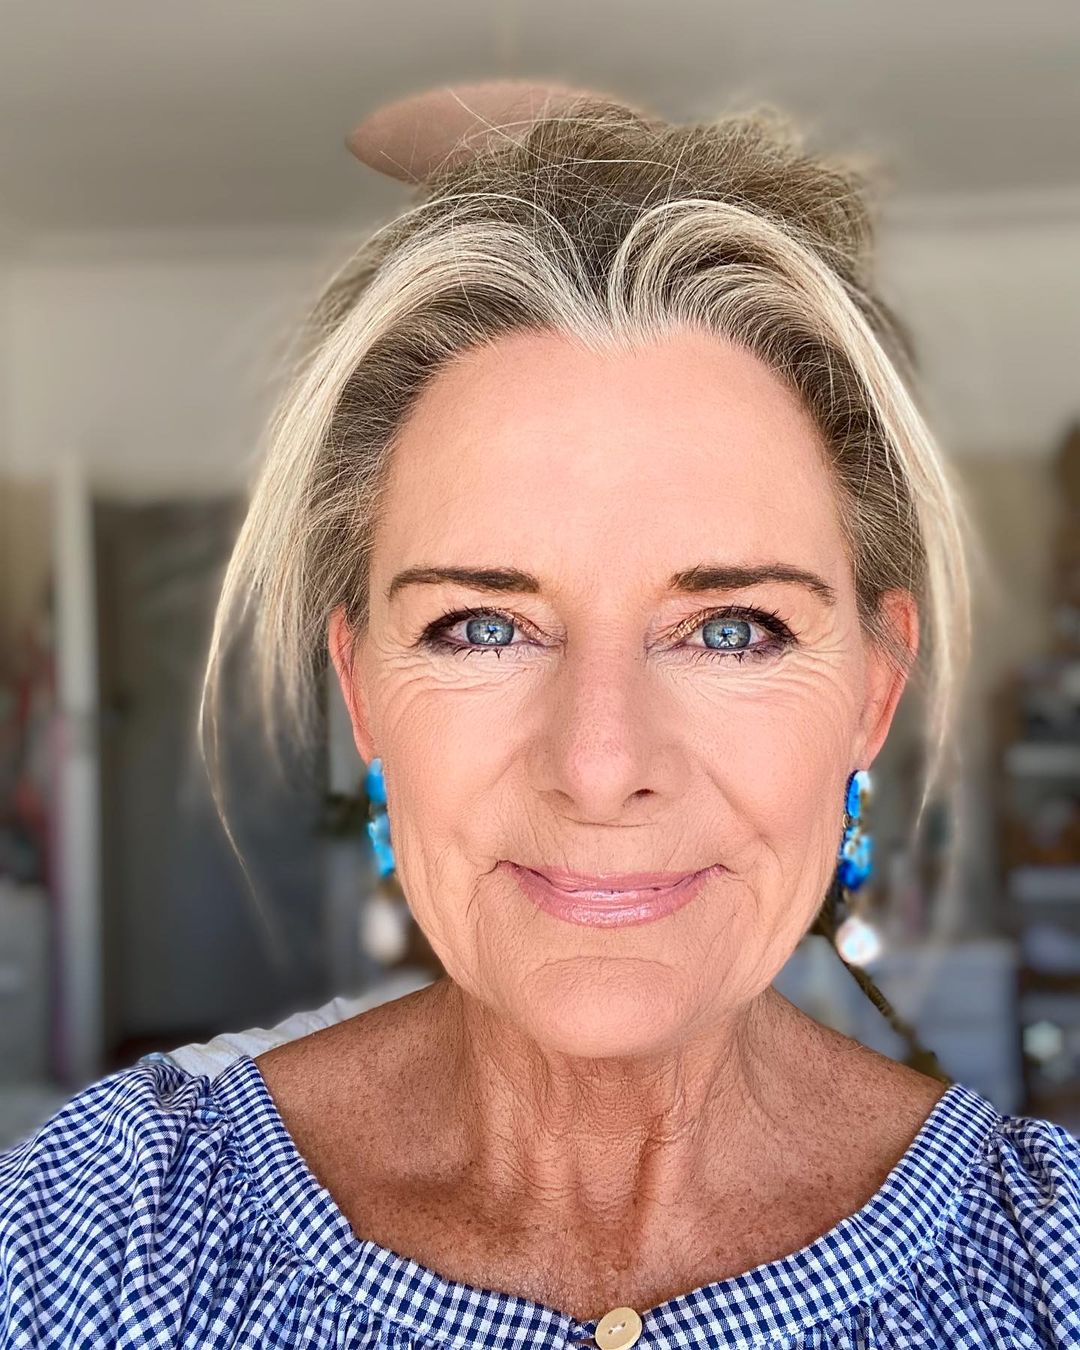 hairstyles for women over 50 116 Hairstyles for 50 year old woman with long hair | Hairstyles for women over 50 with fine hair | Medium length hairstyles for women over 50 Hairstyles for women over 50